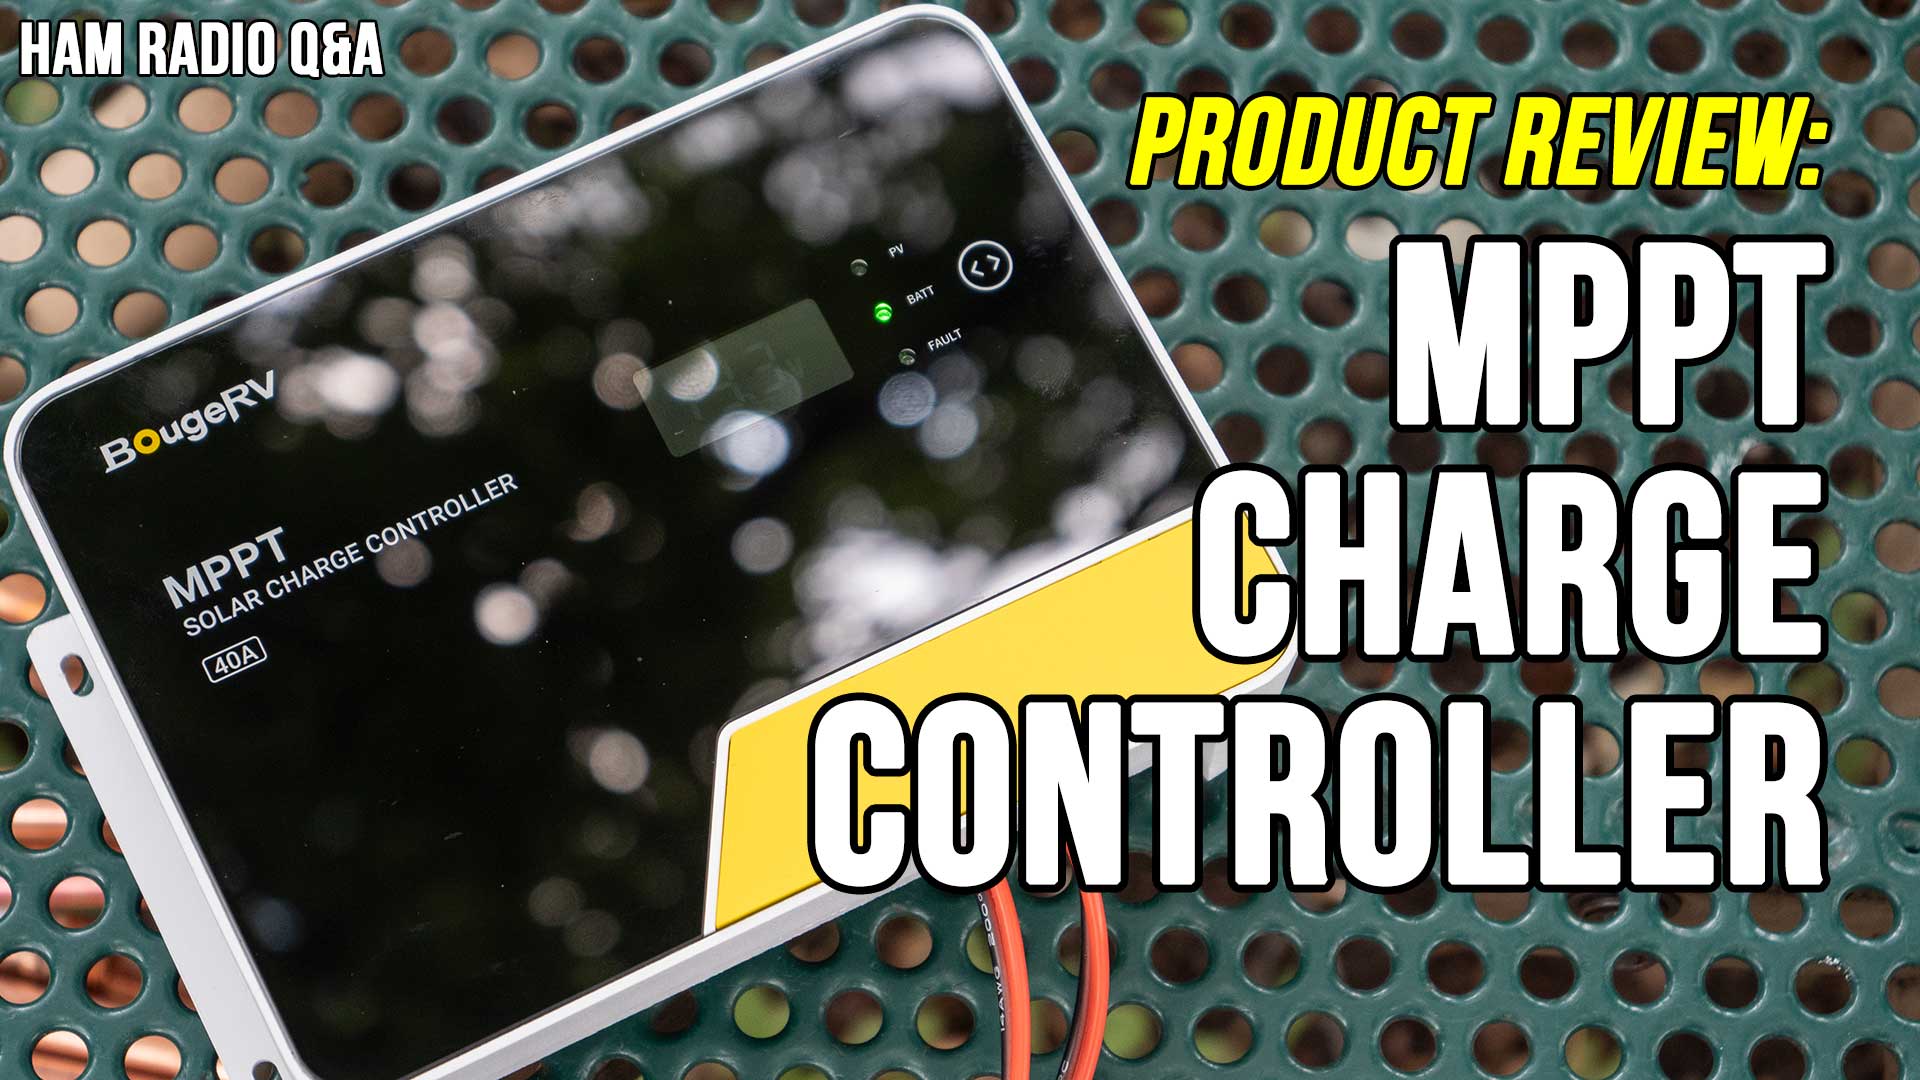 BougeRV 40amp MPPT Solar Charge Controller Product Review - KB9VBR Antennas